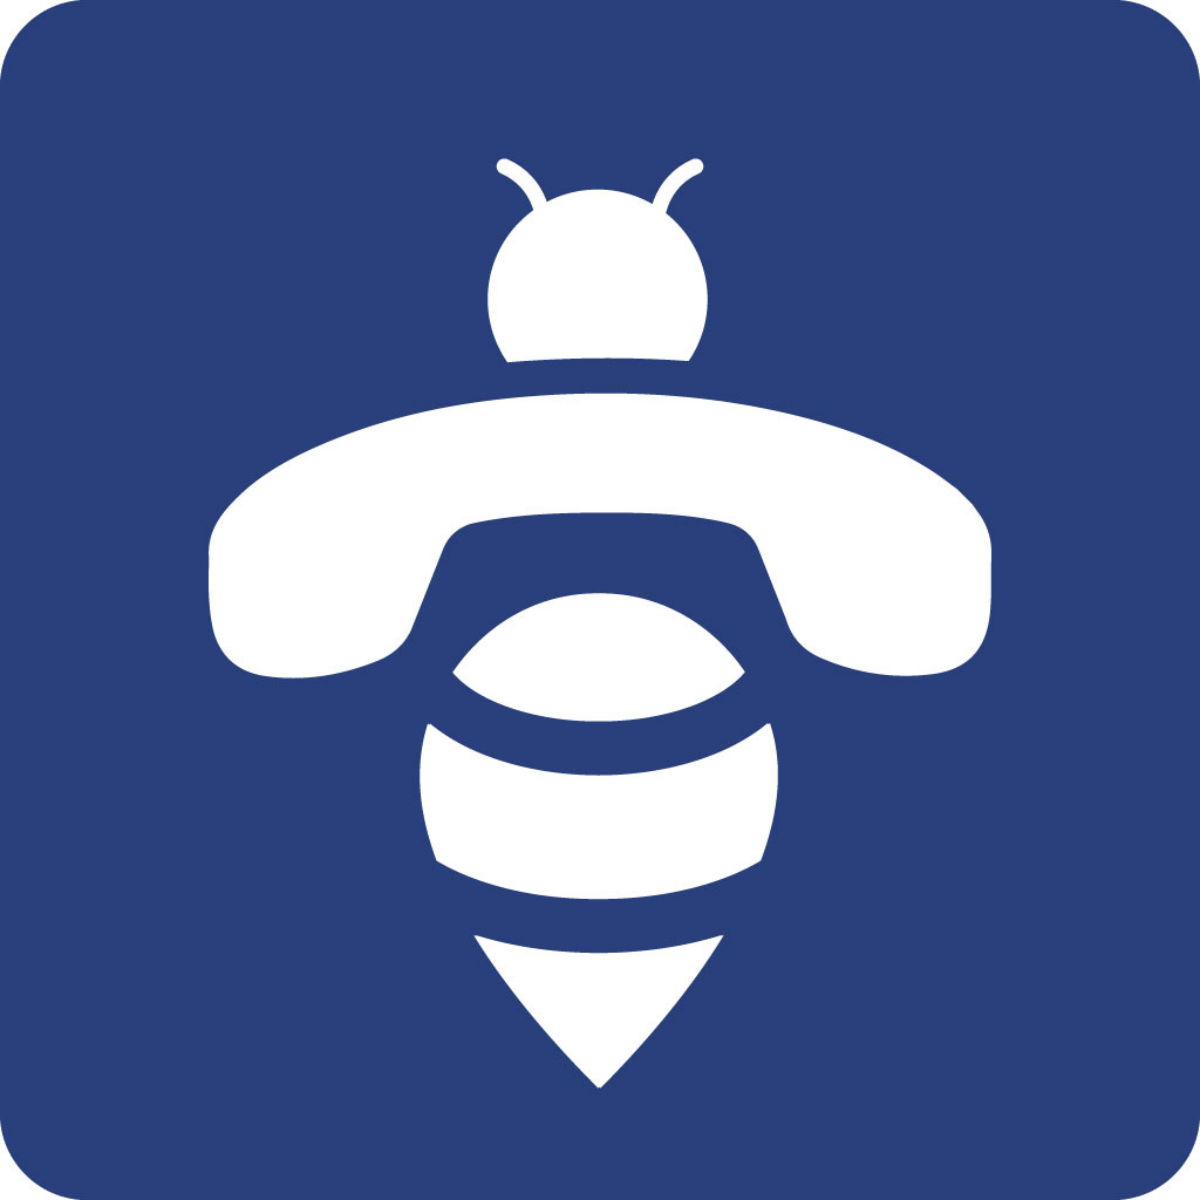 Swarm ‑ Detect Customer Calls for Shopify